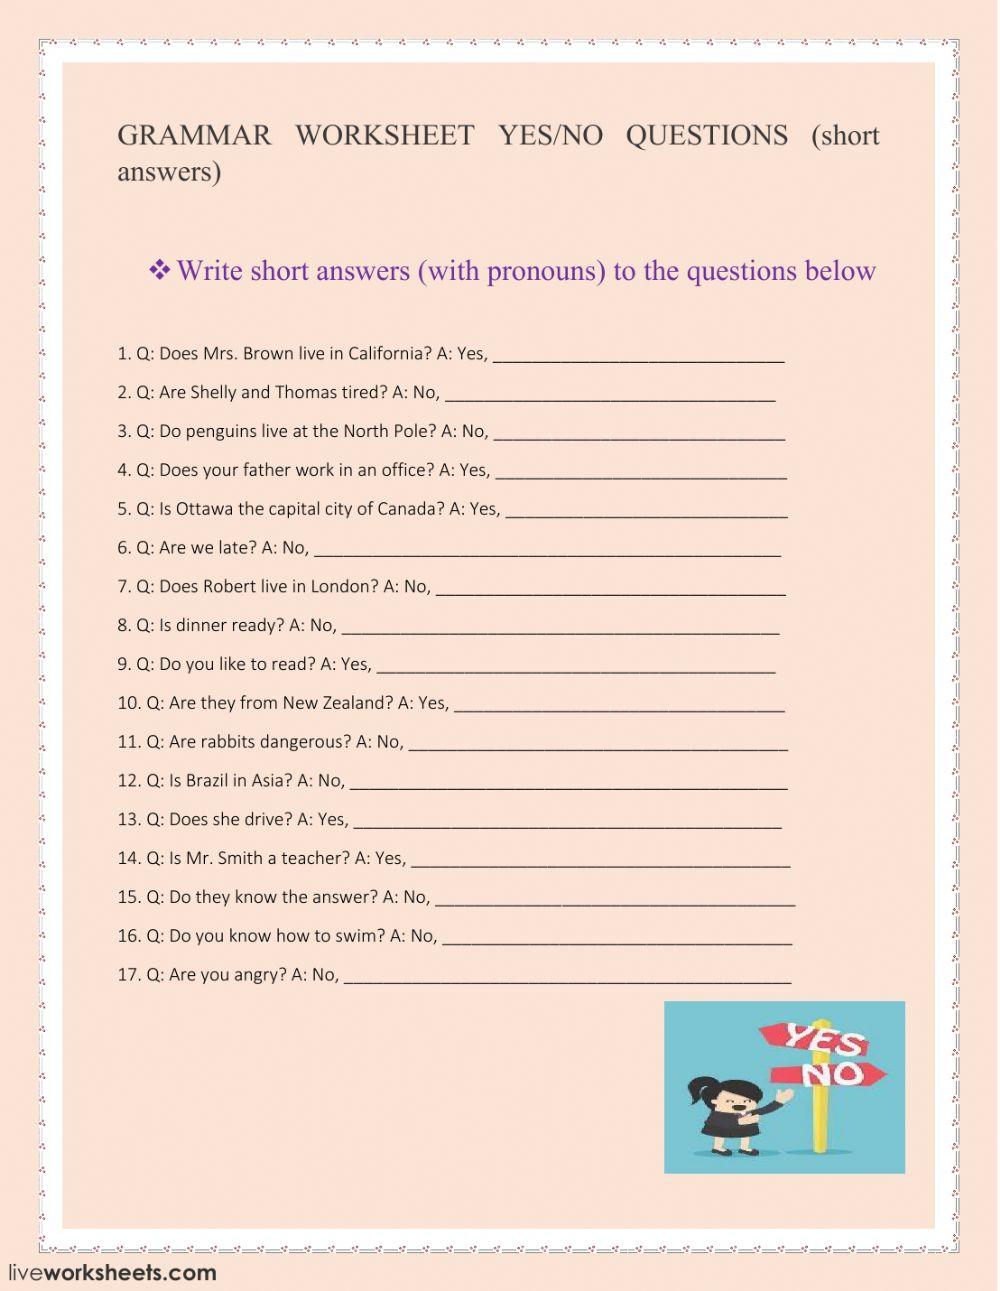 Yes-No short answers worksheet | Live Worksheets